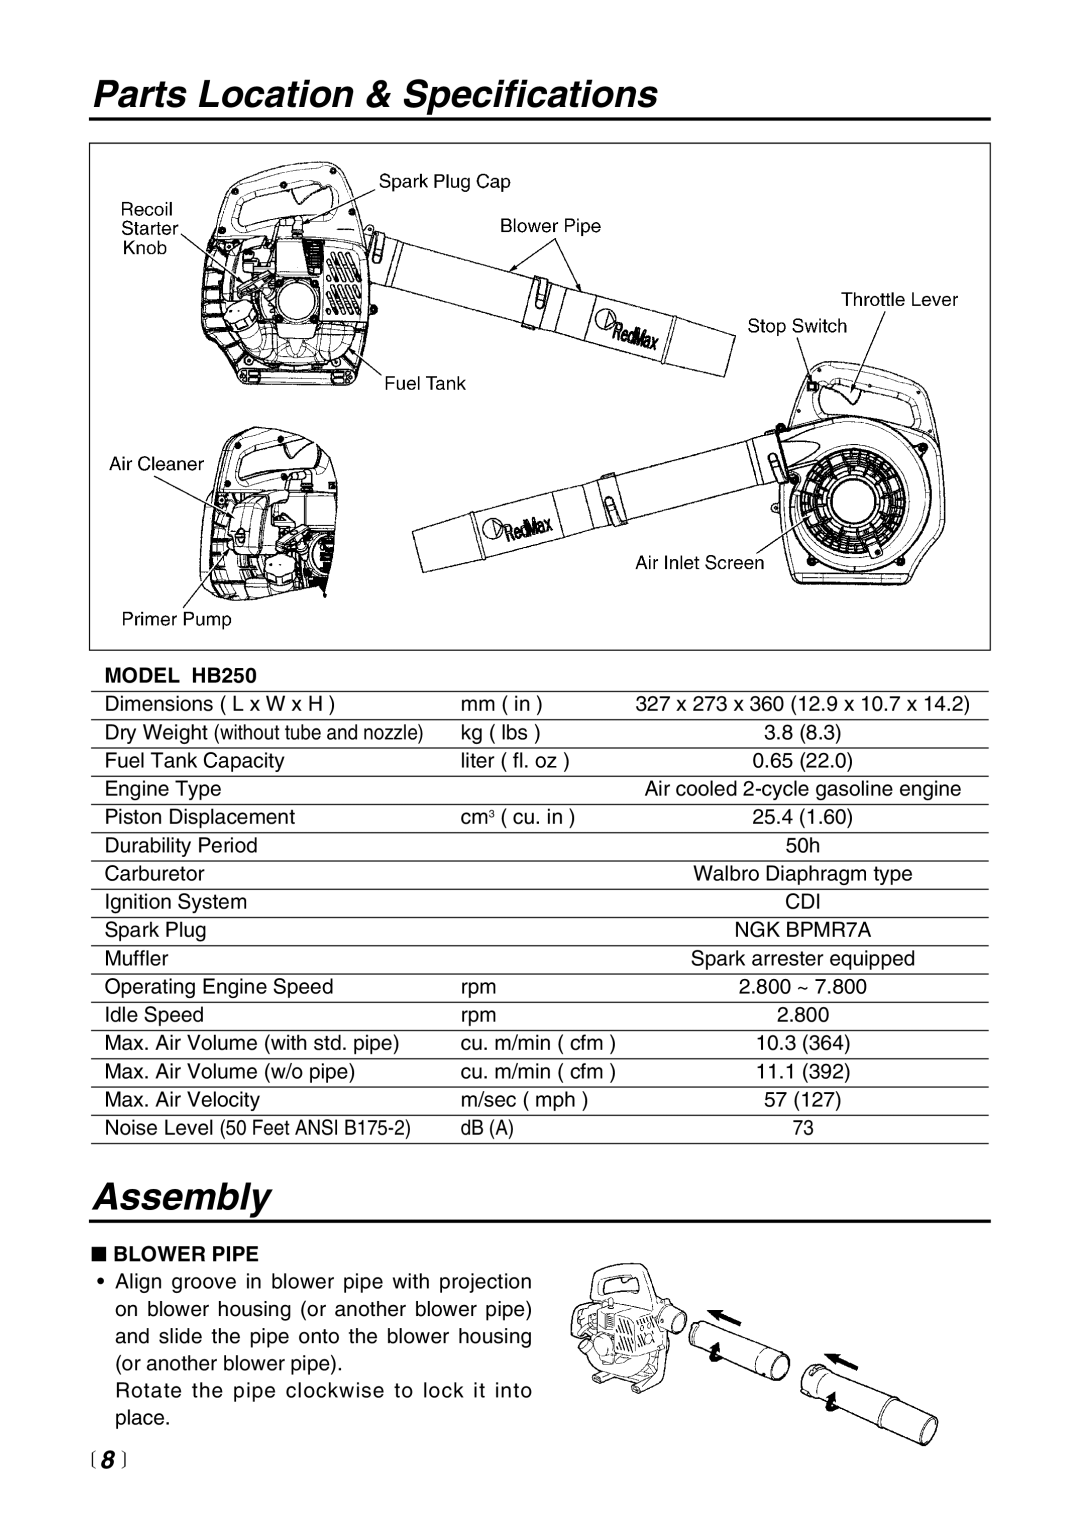 RedMax manual Parts Location & Specifications, Assembly,  8 , MODEL HB250, Blower Pipe 